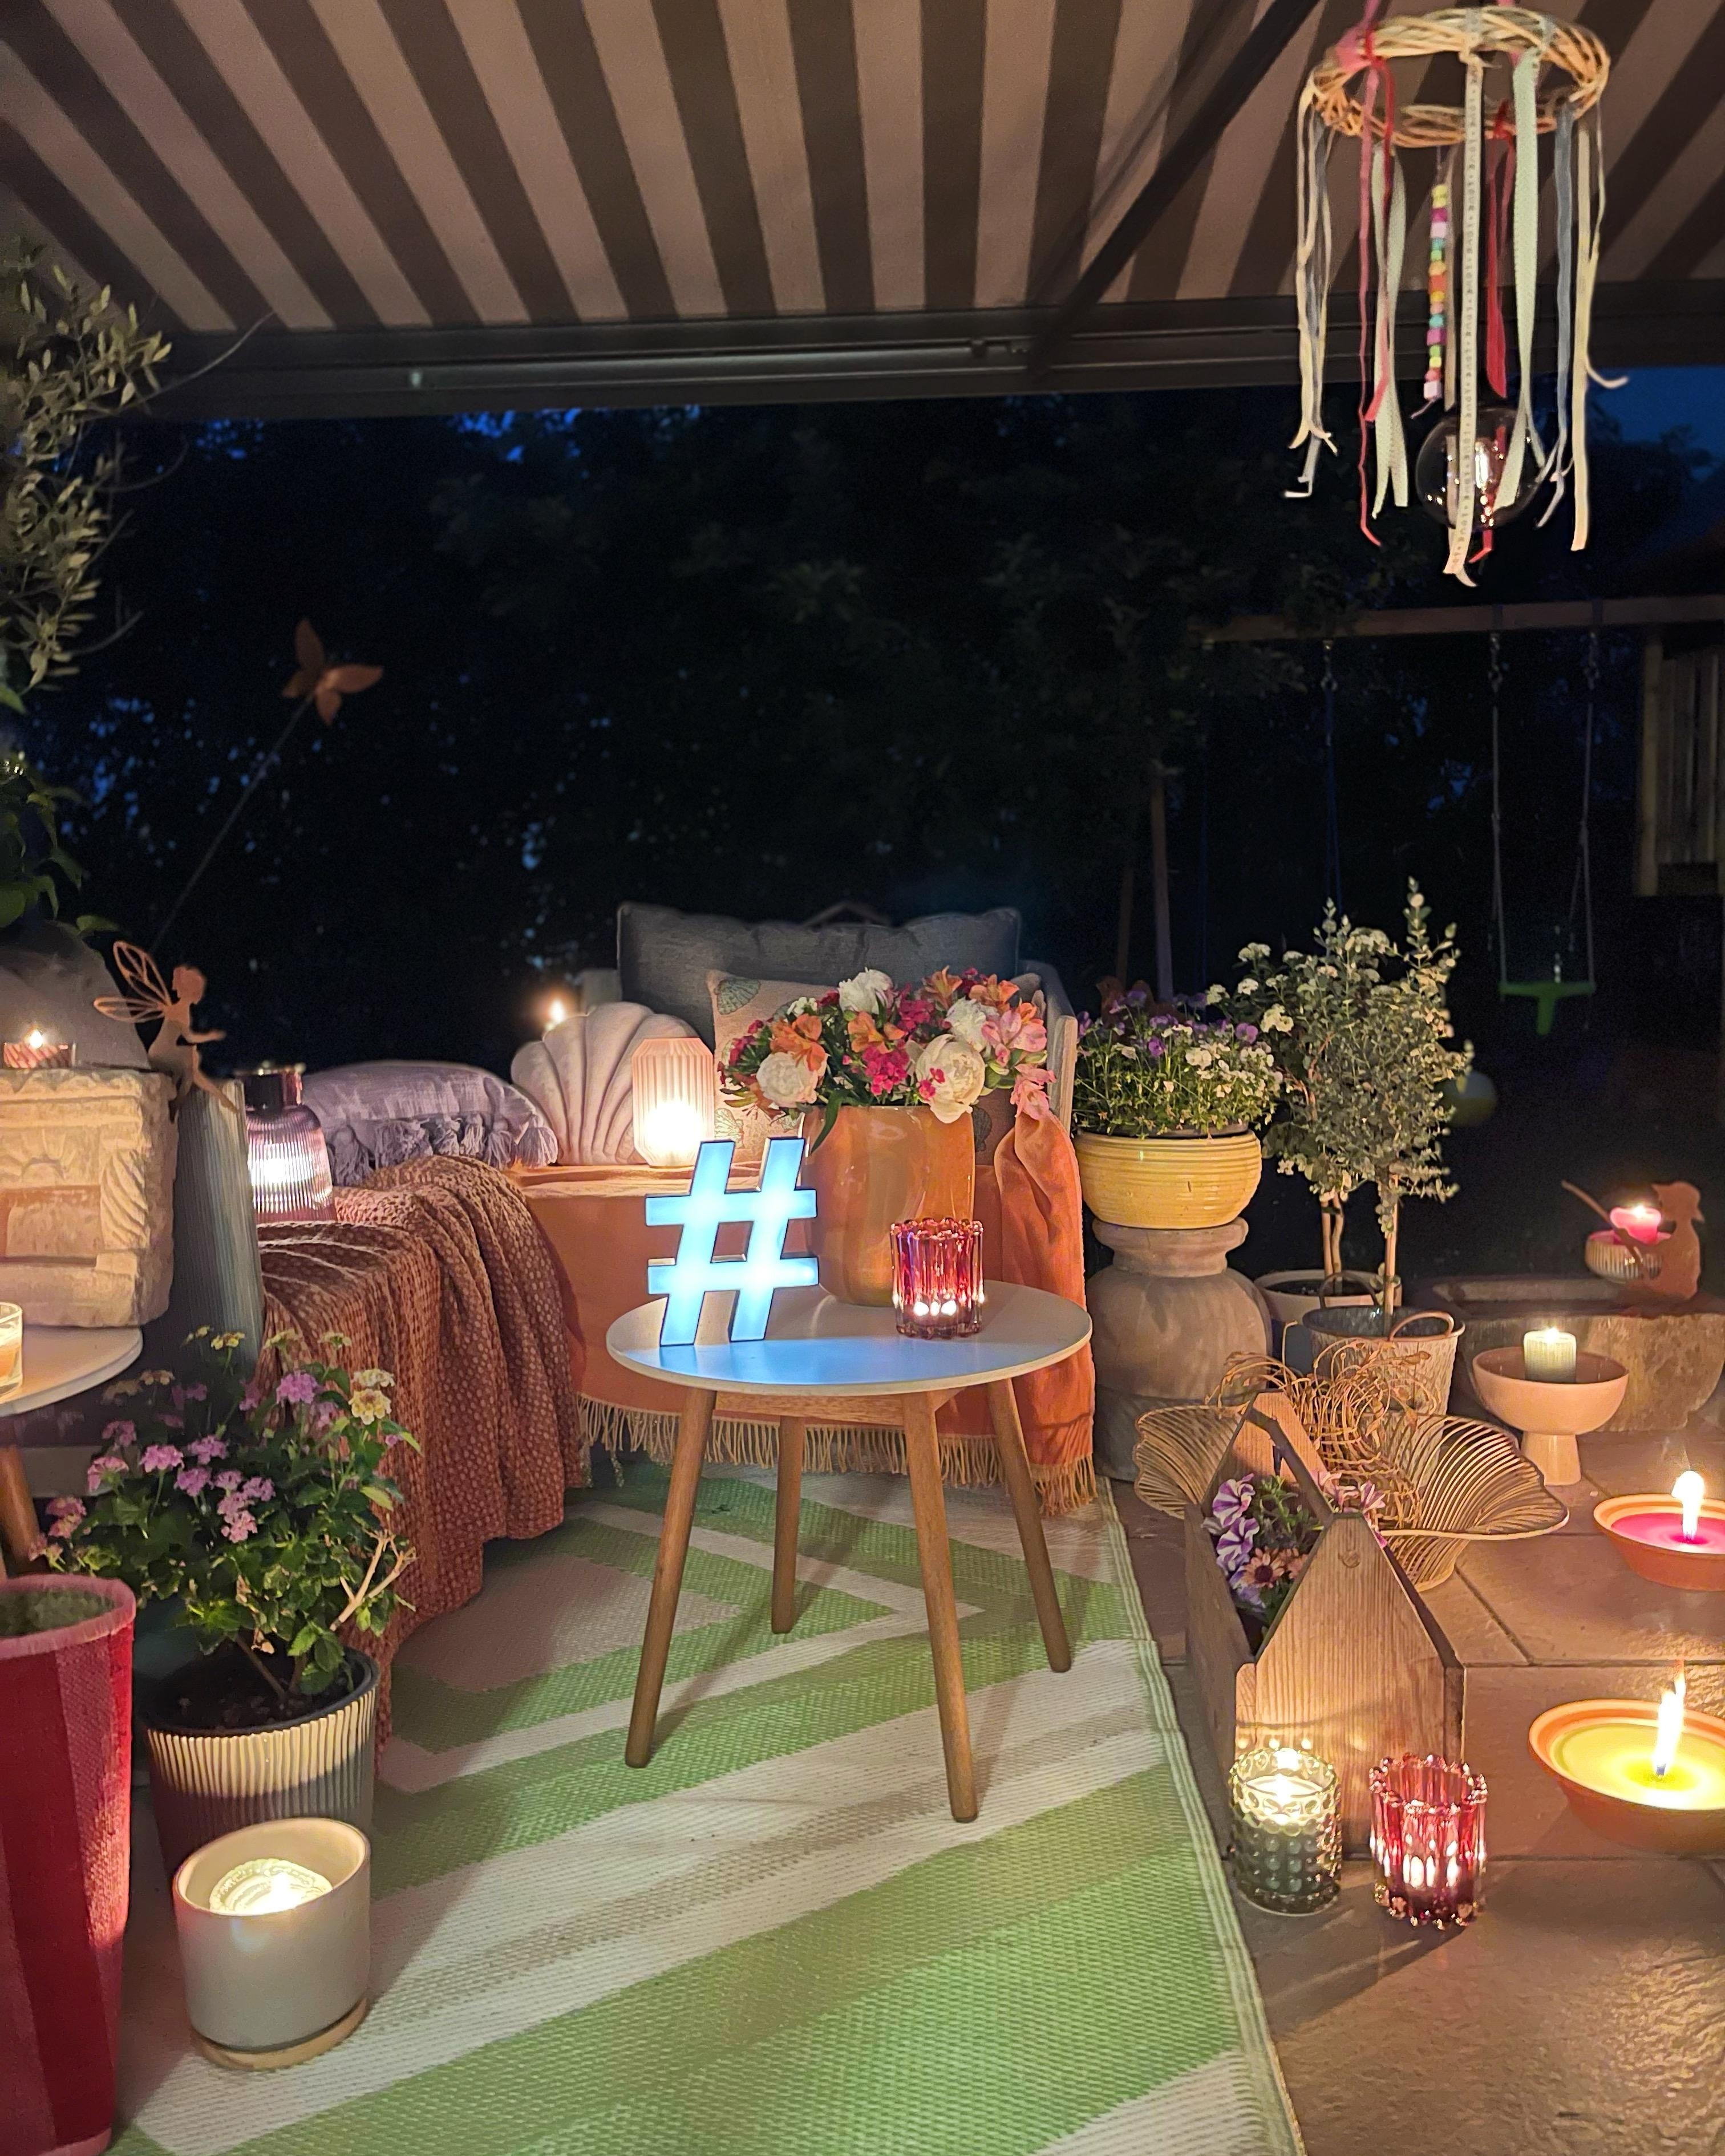 #gartenparty by #night and loads of #candlelight 🕯💕🌸